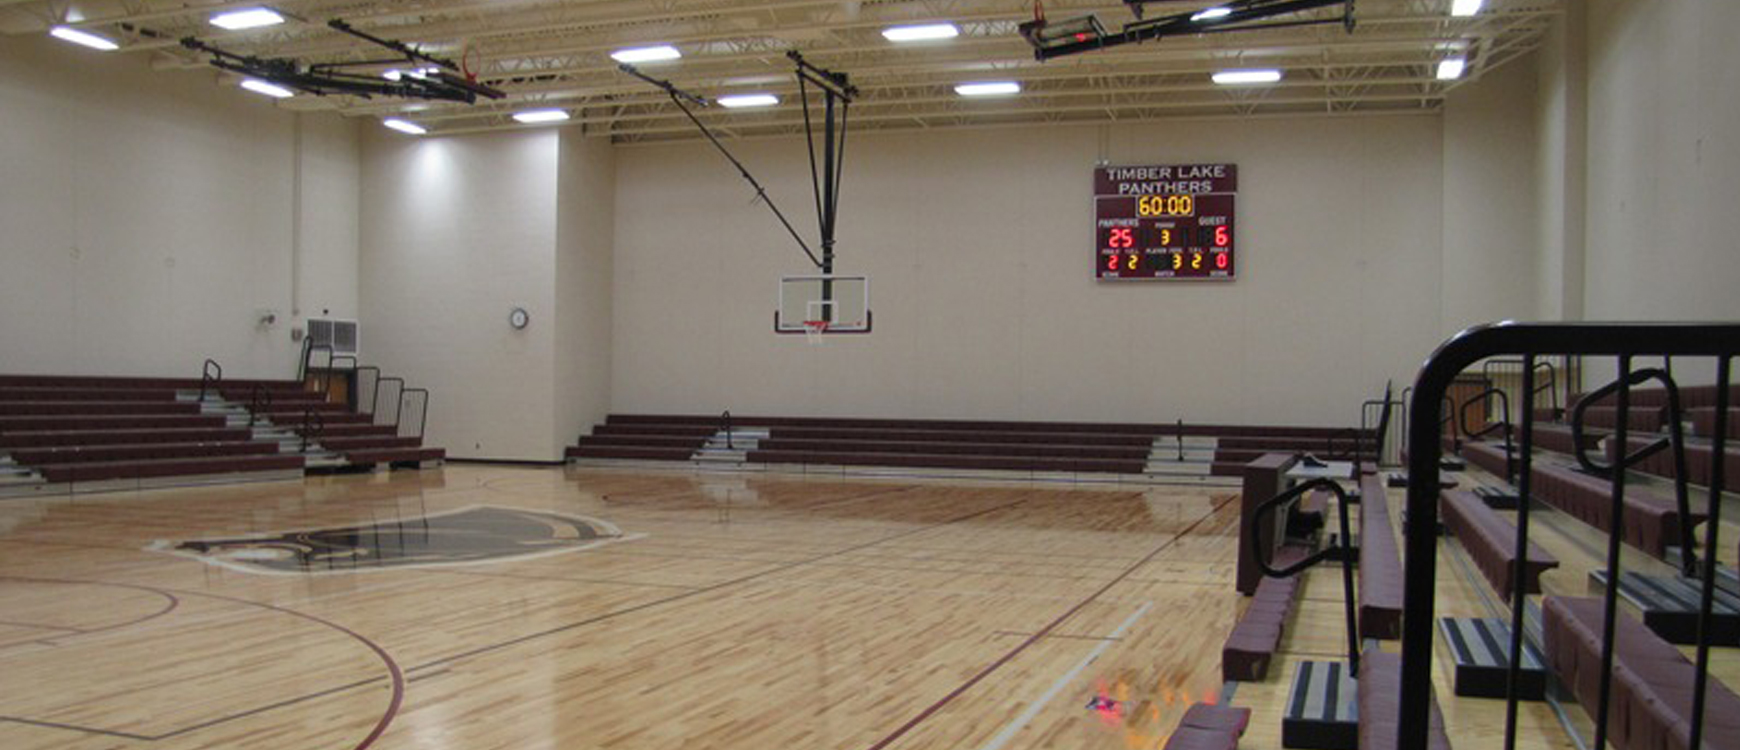 Kyburz Carlson Construction – Projects – Education – Timber Lake High School